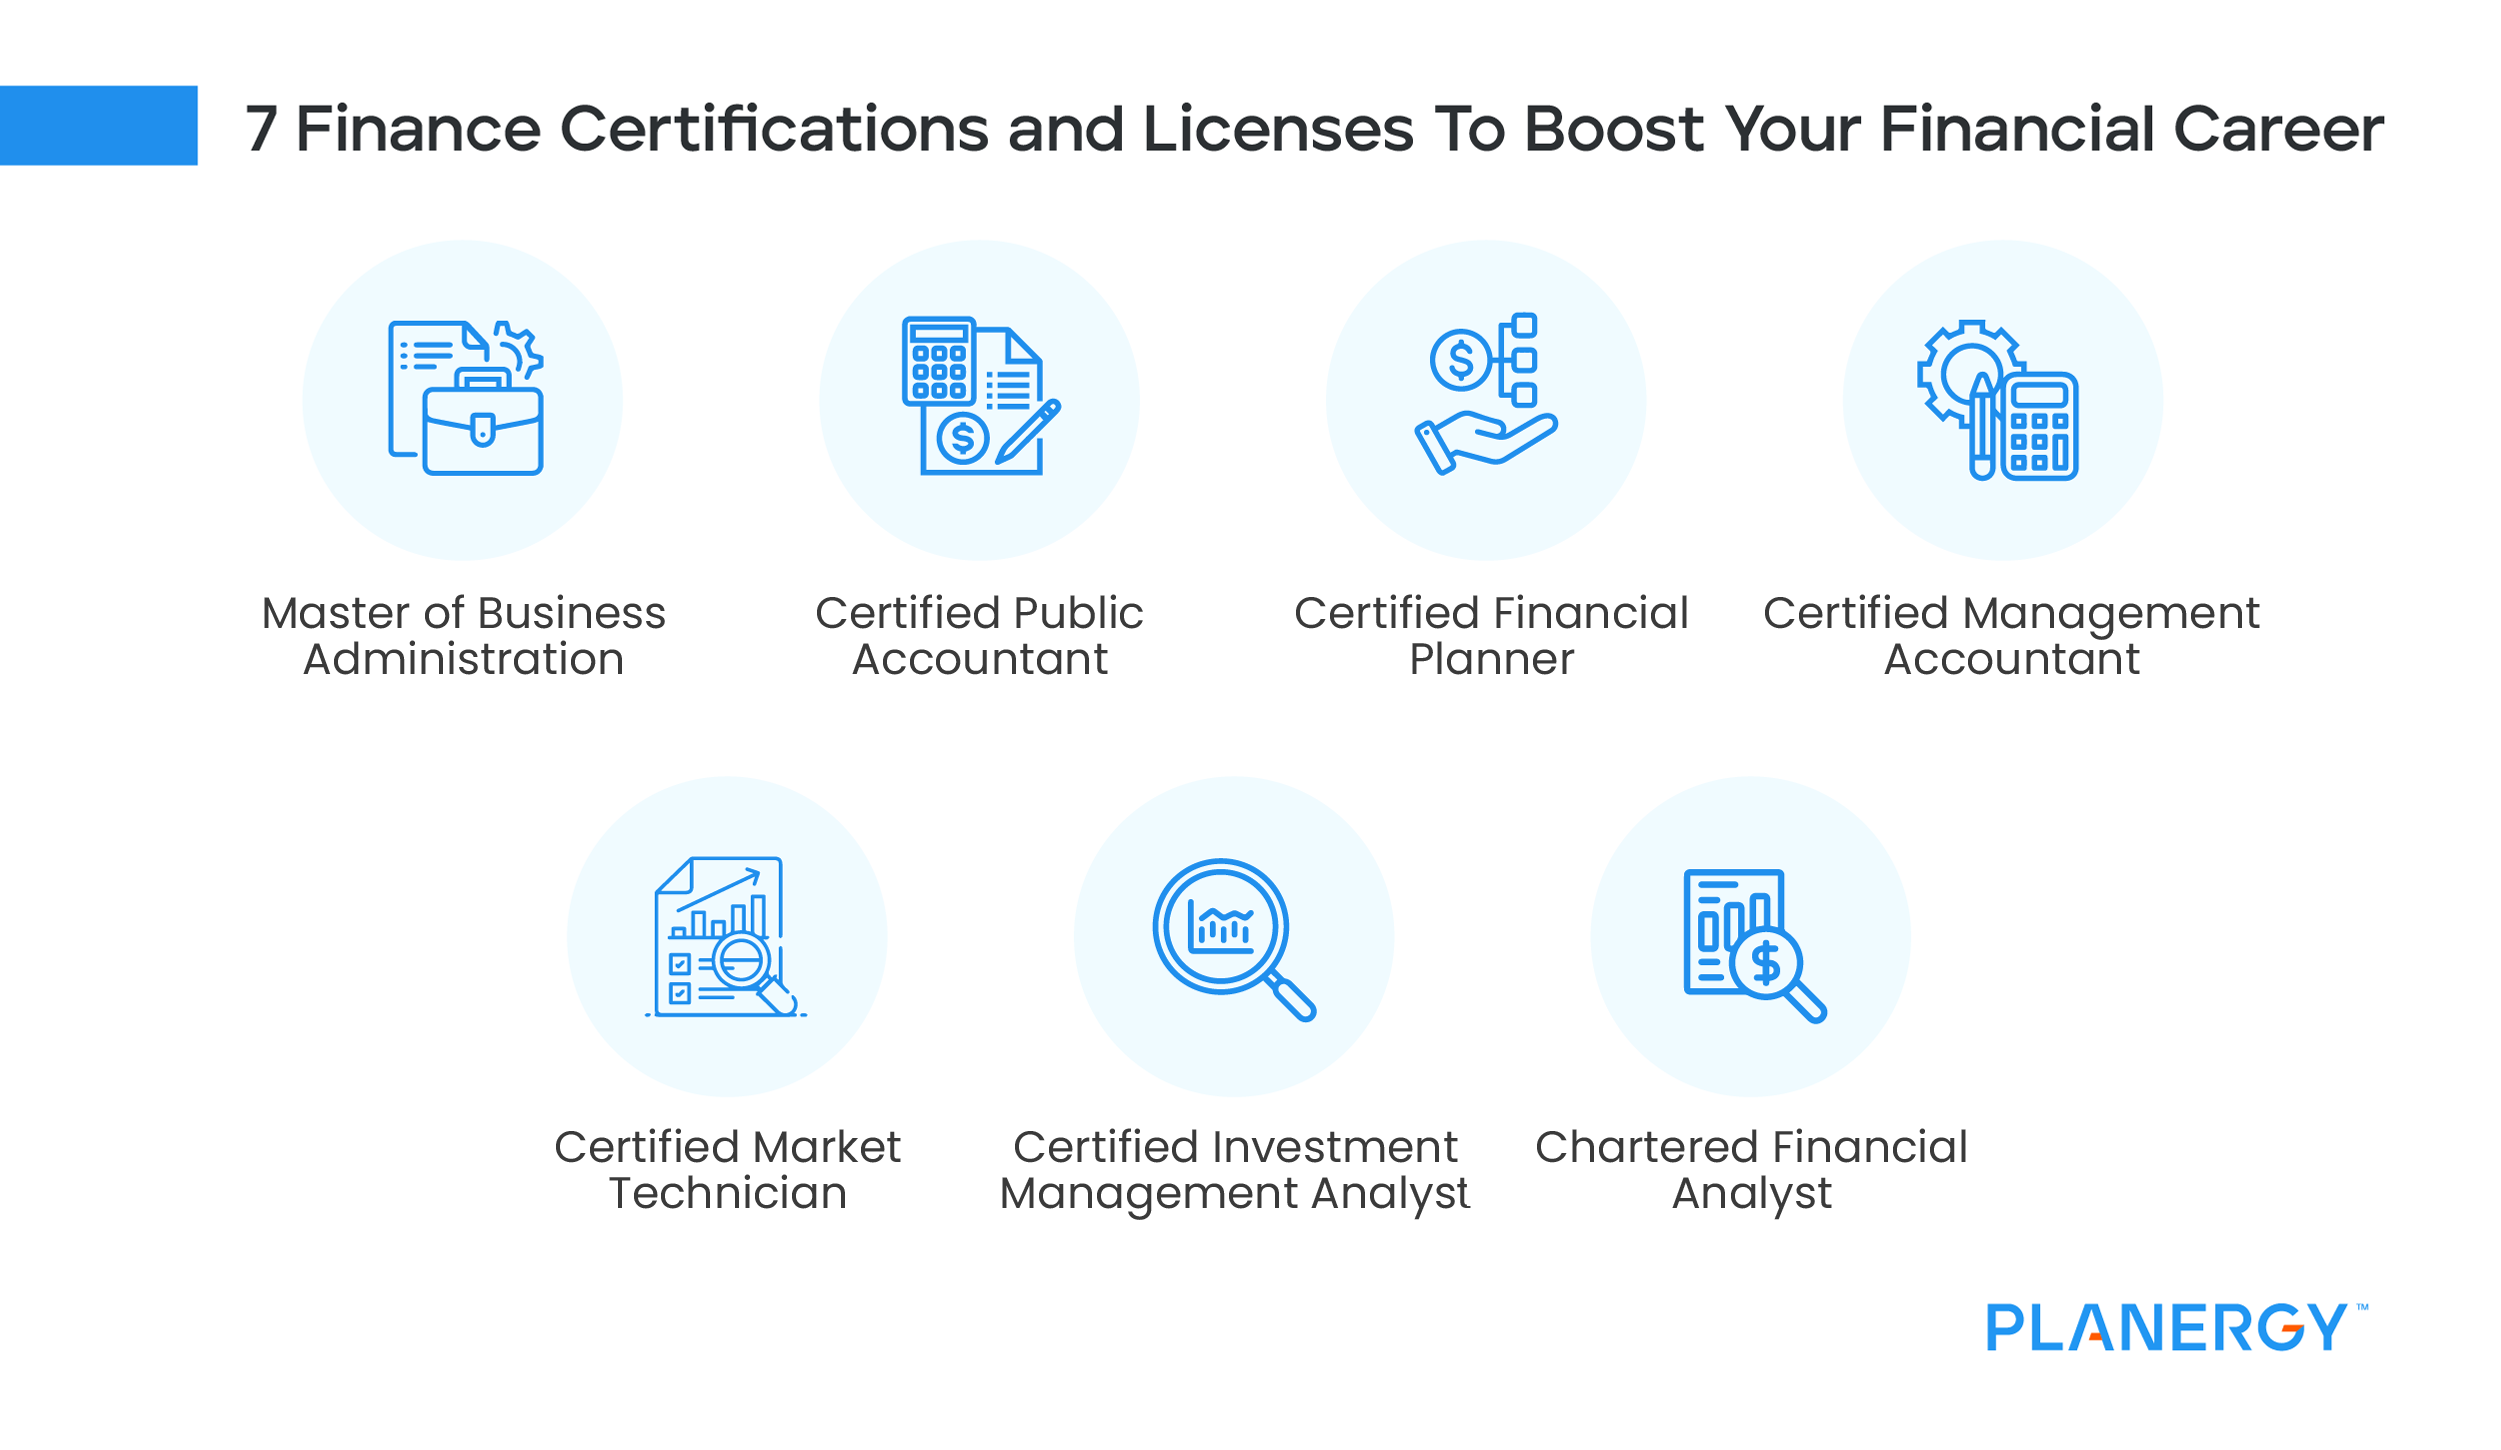 7 Finance Certifications and Licences To Boost Your Finance Career